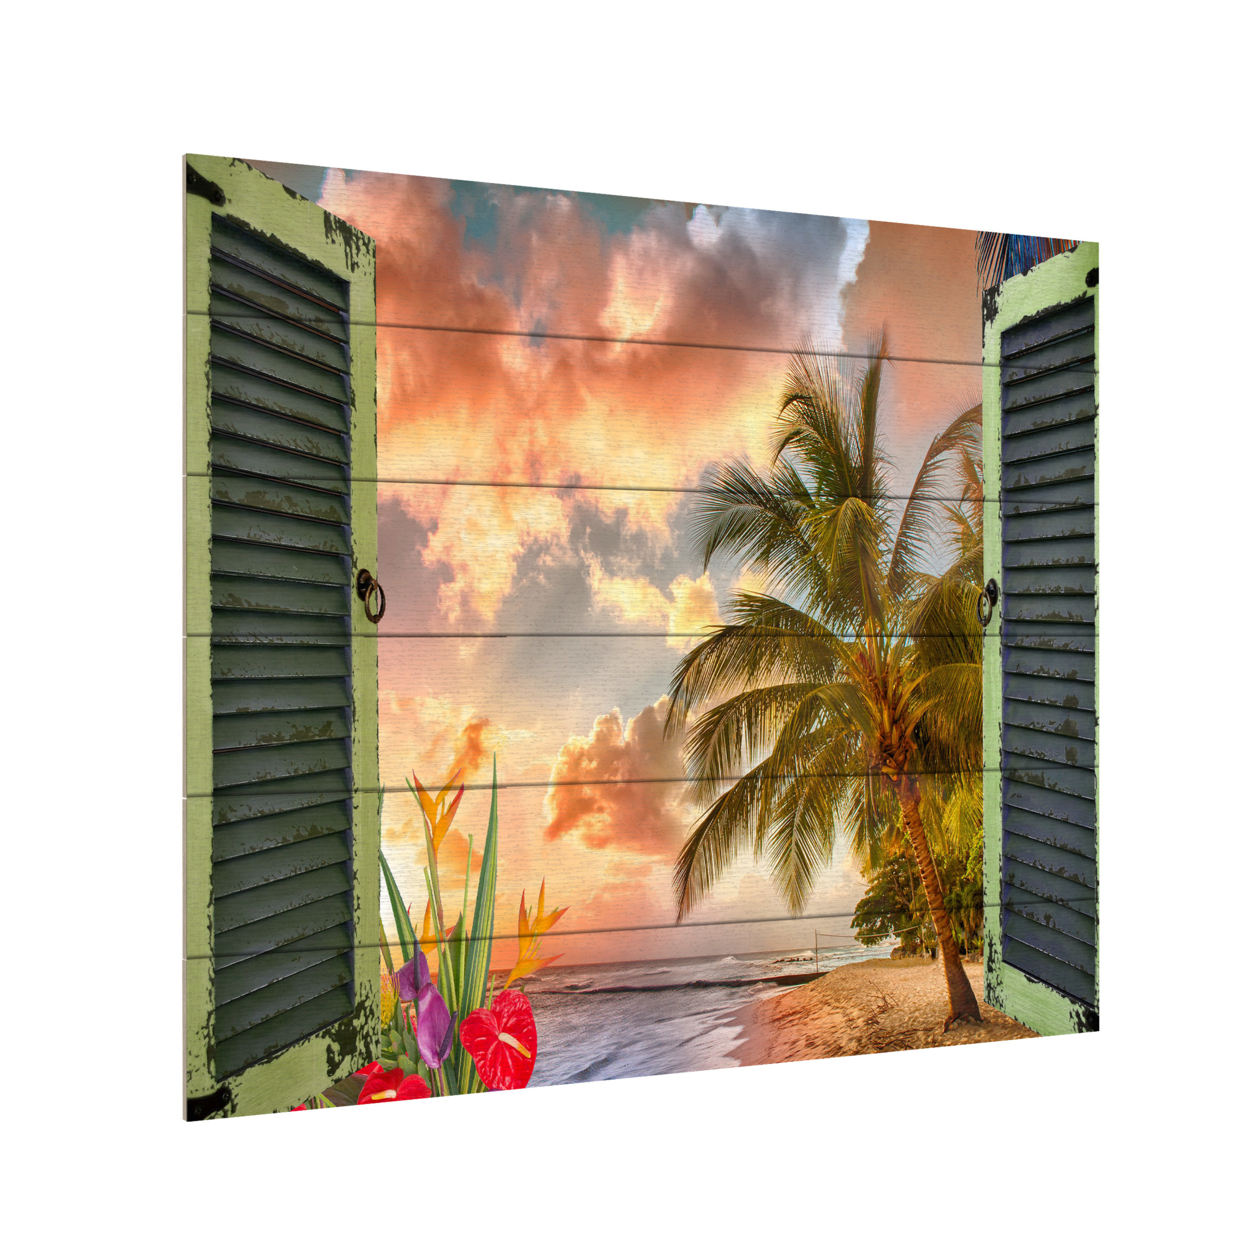 Wooden Slat Art 18 X 22 Inches Titled Window To Paradise IV Ready To Hang Home Decor Picture